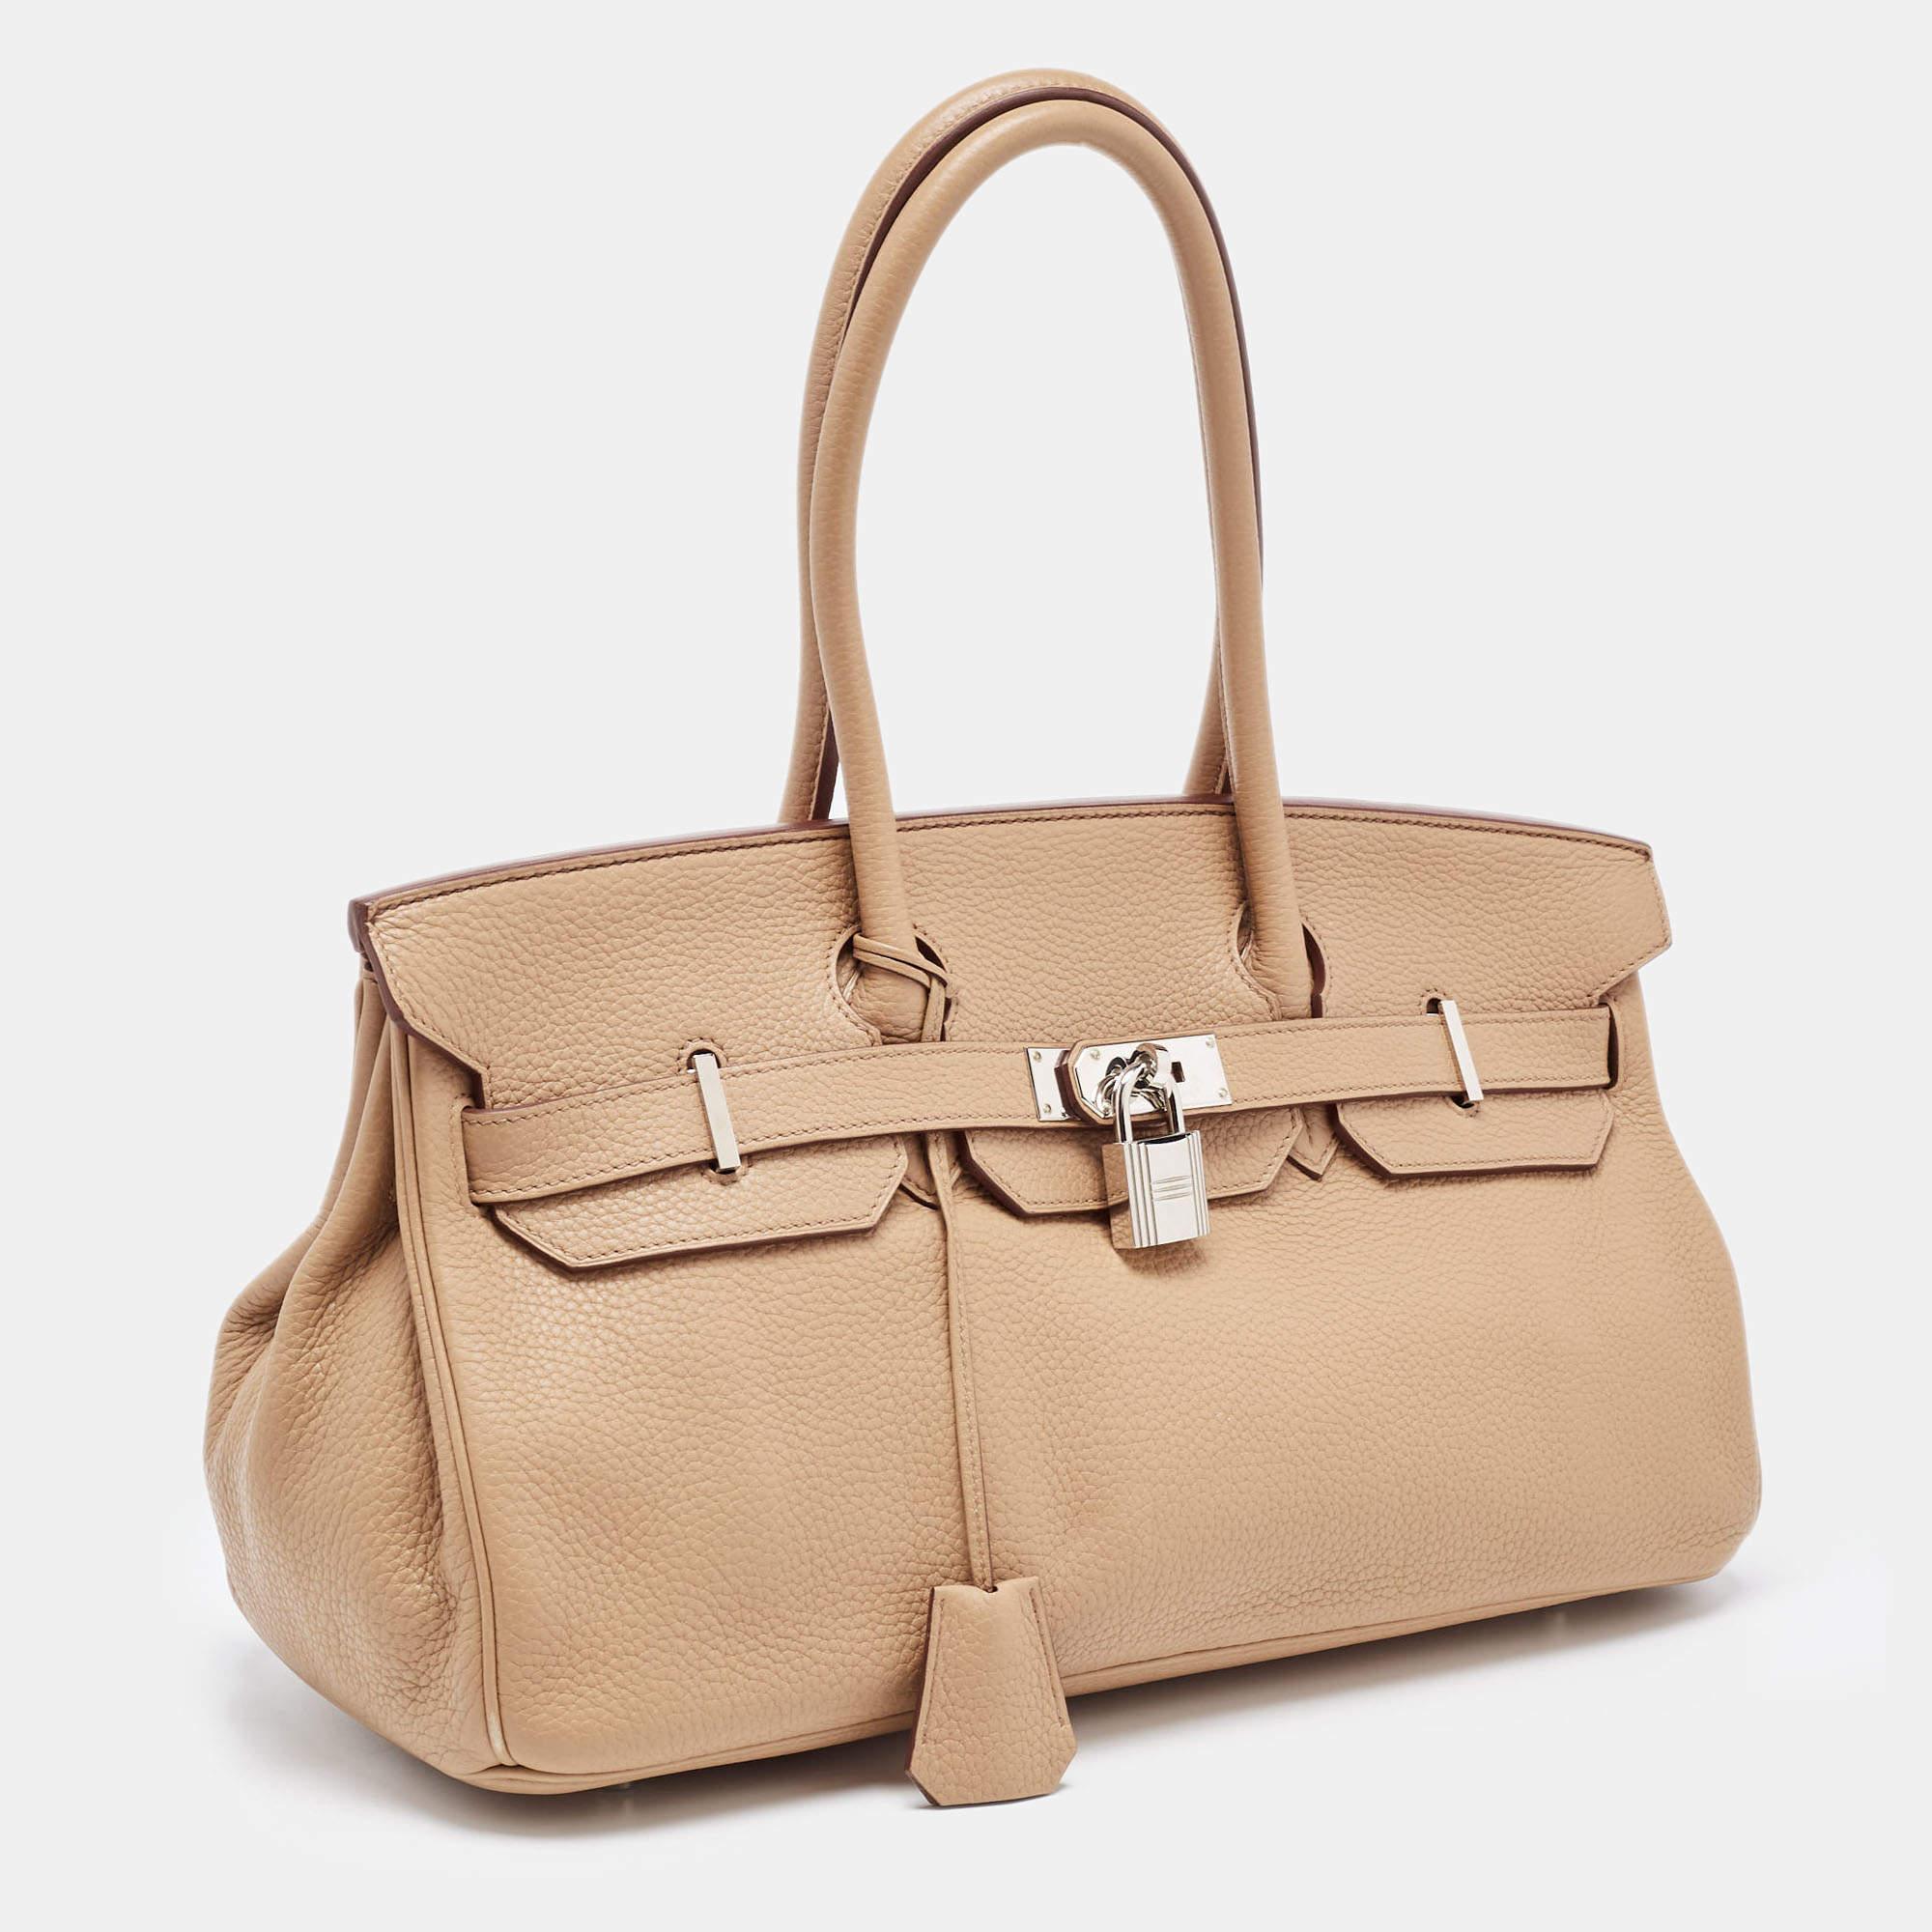 One of the most iconic bags, the Hermes Birkin 42 will make a standout addition to your collection. The bag is crafted from leather and has palladium-finish hardware. Slouchy in design, it has enough room to carry your everyday essentials and more.